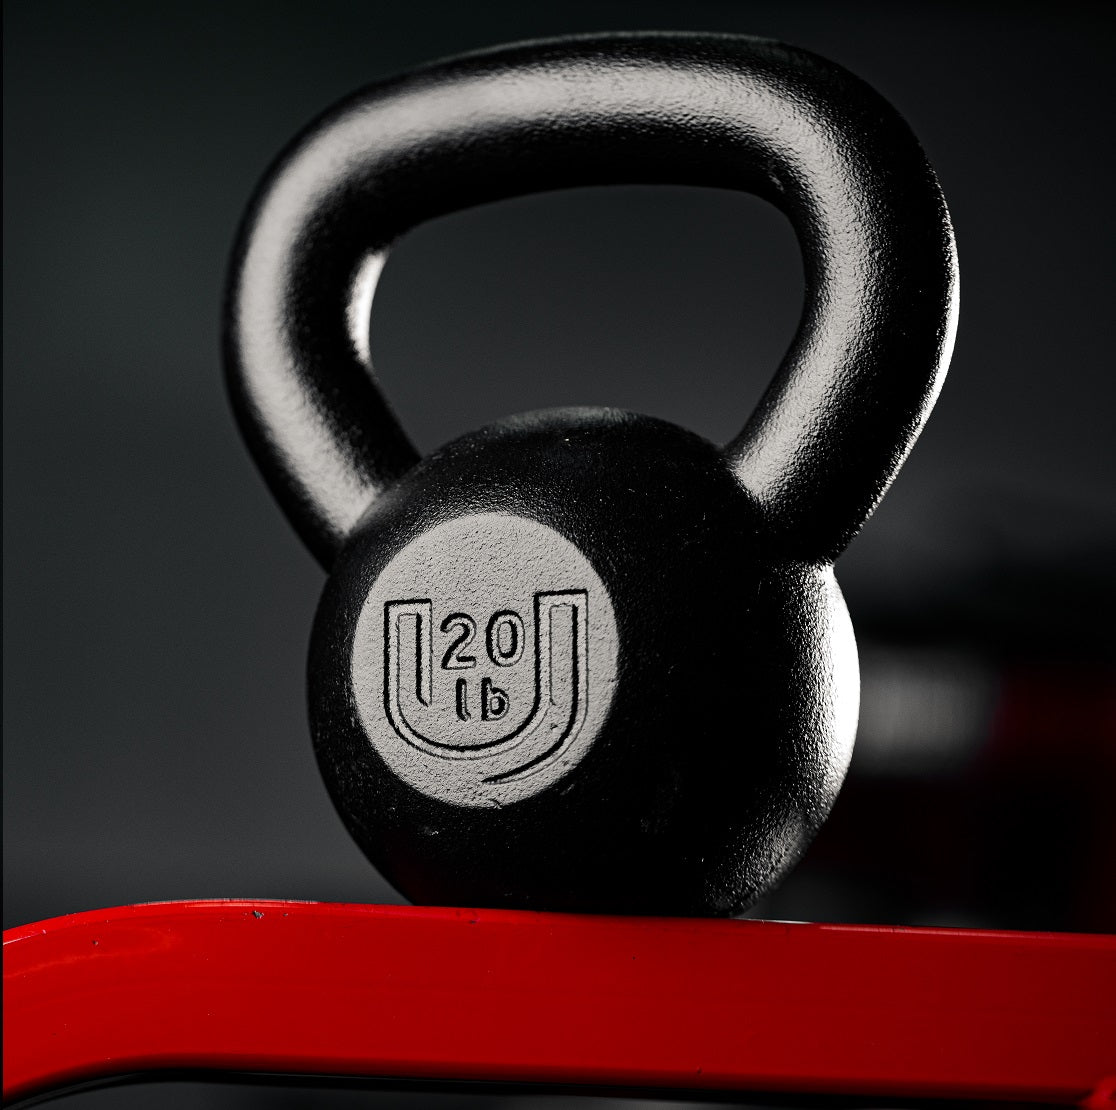 20 lb Kettlebell (8 kg) - Made in the USA